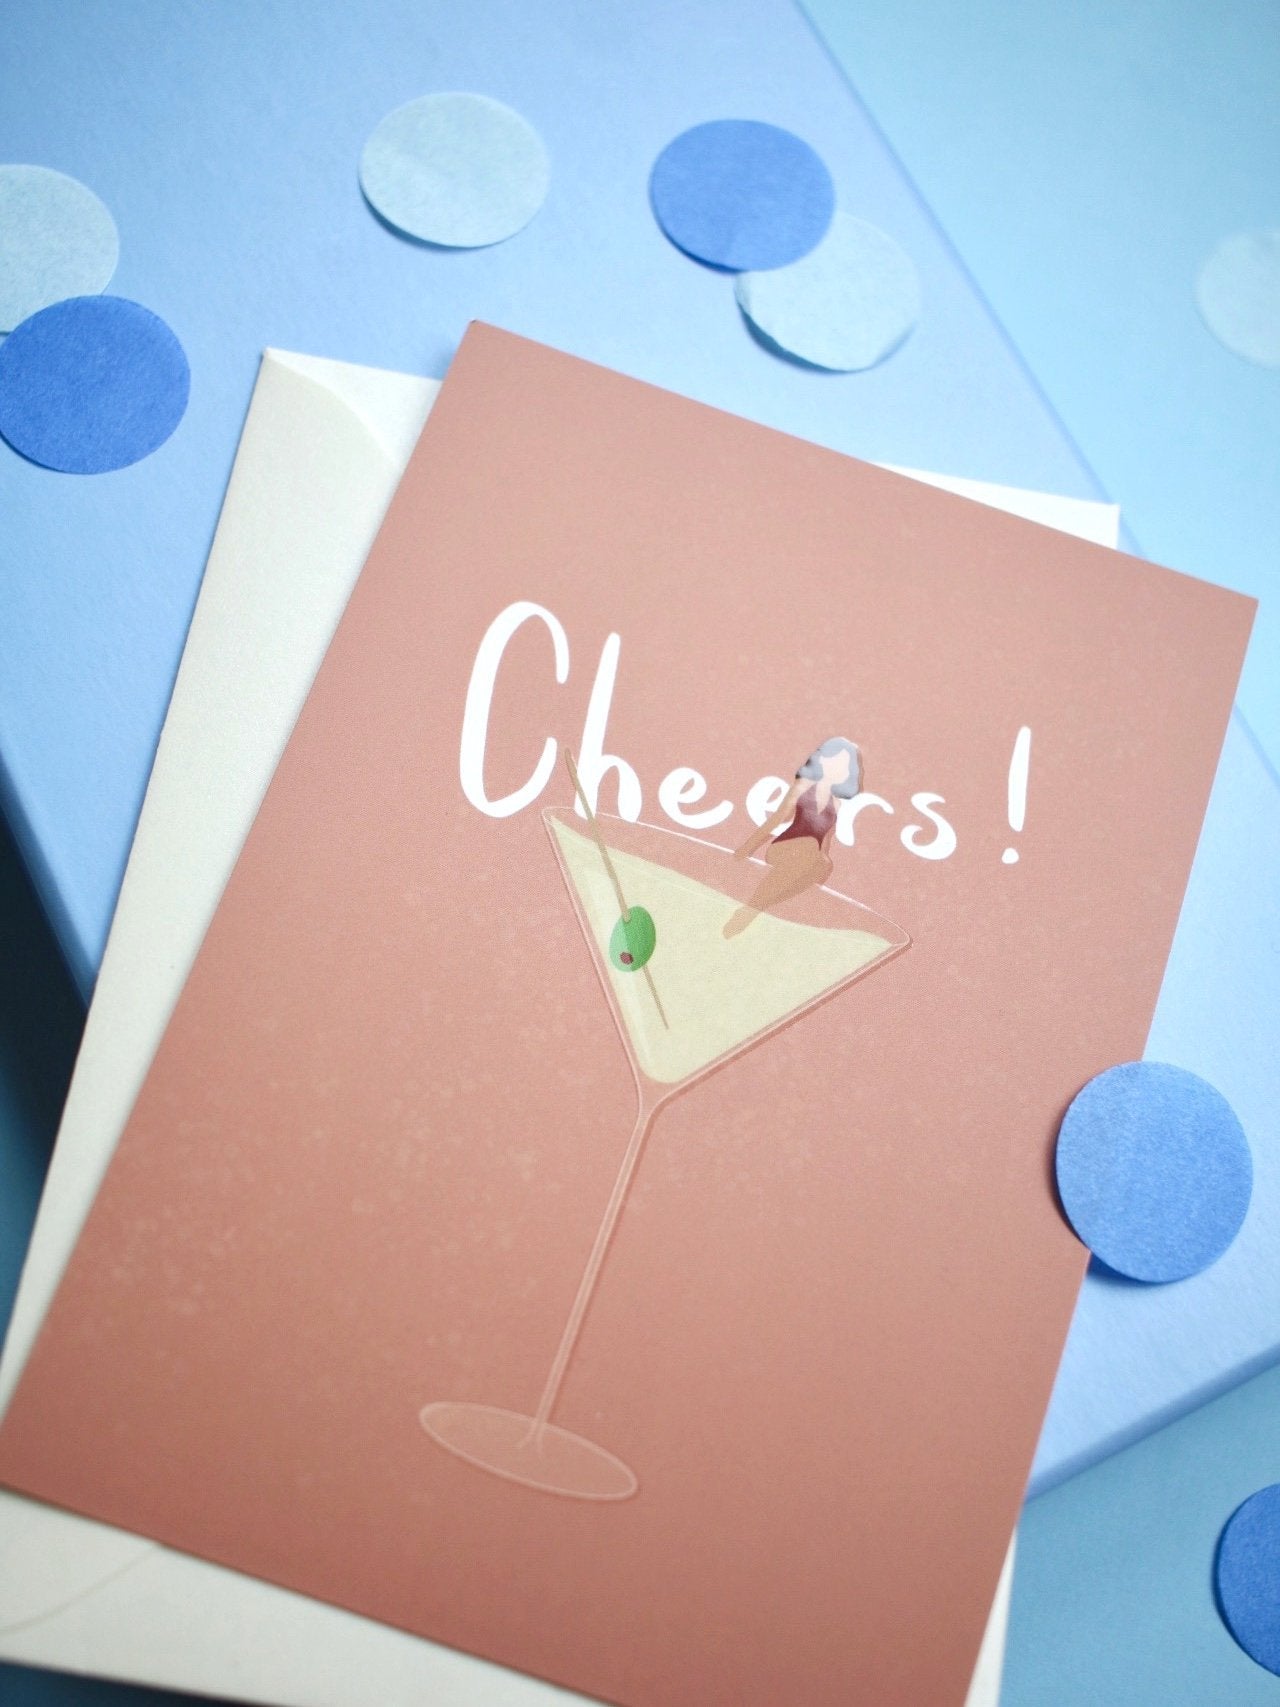 Cheers! Martini Cocktail Card Greeting Cards - Honeypress Design